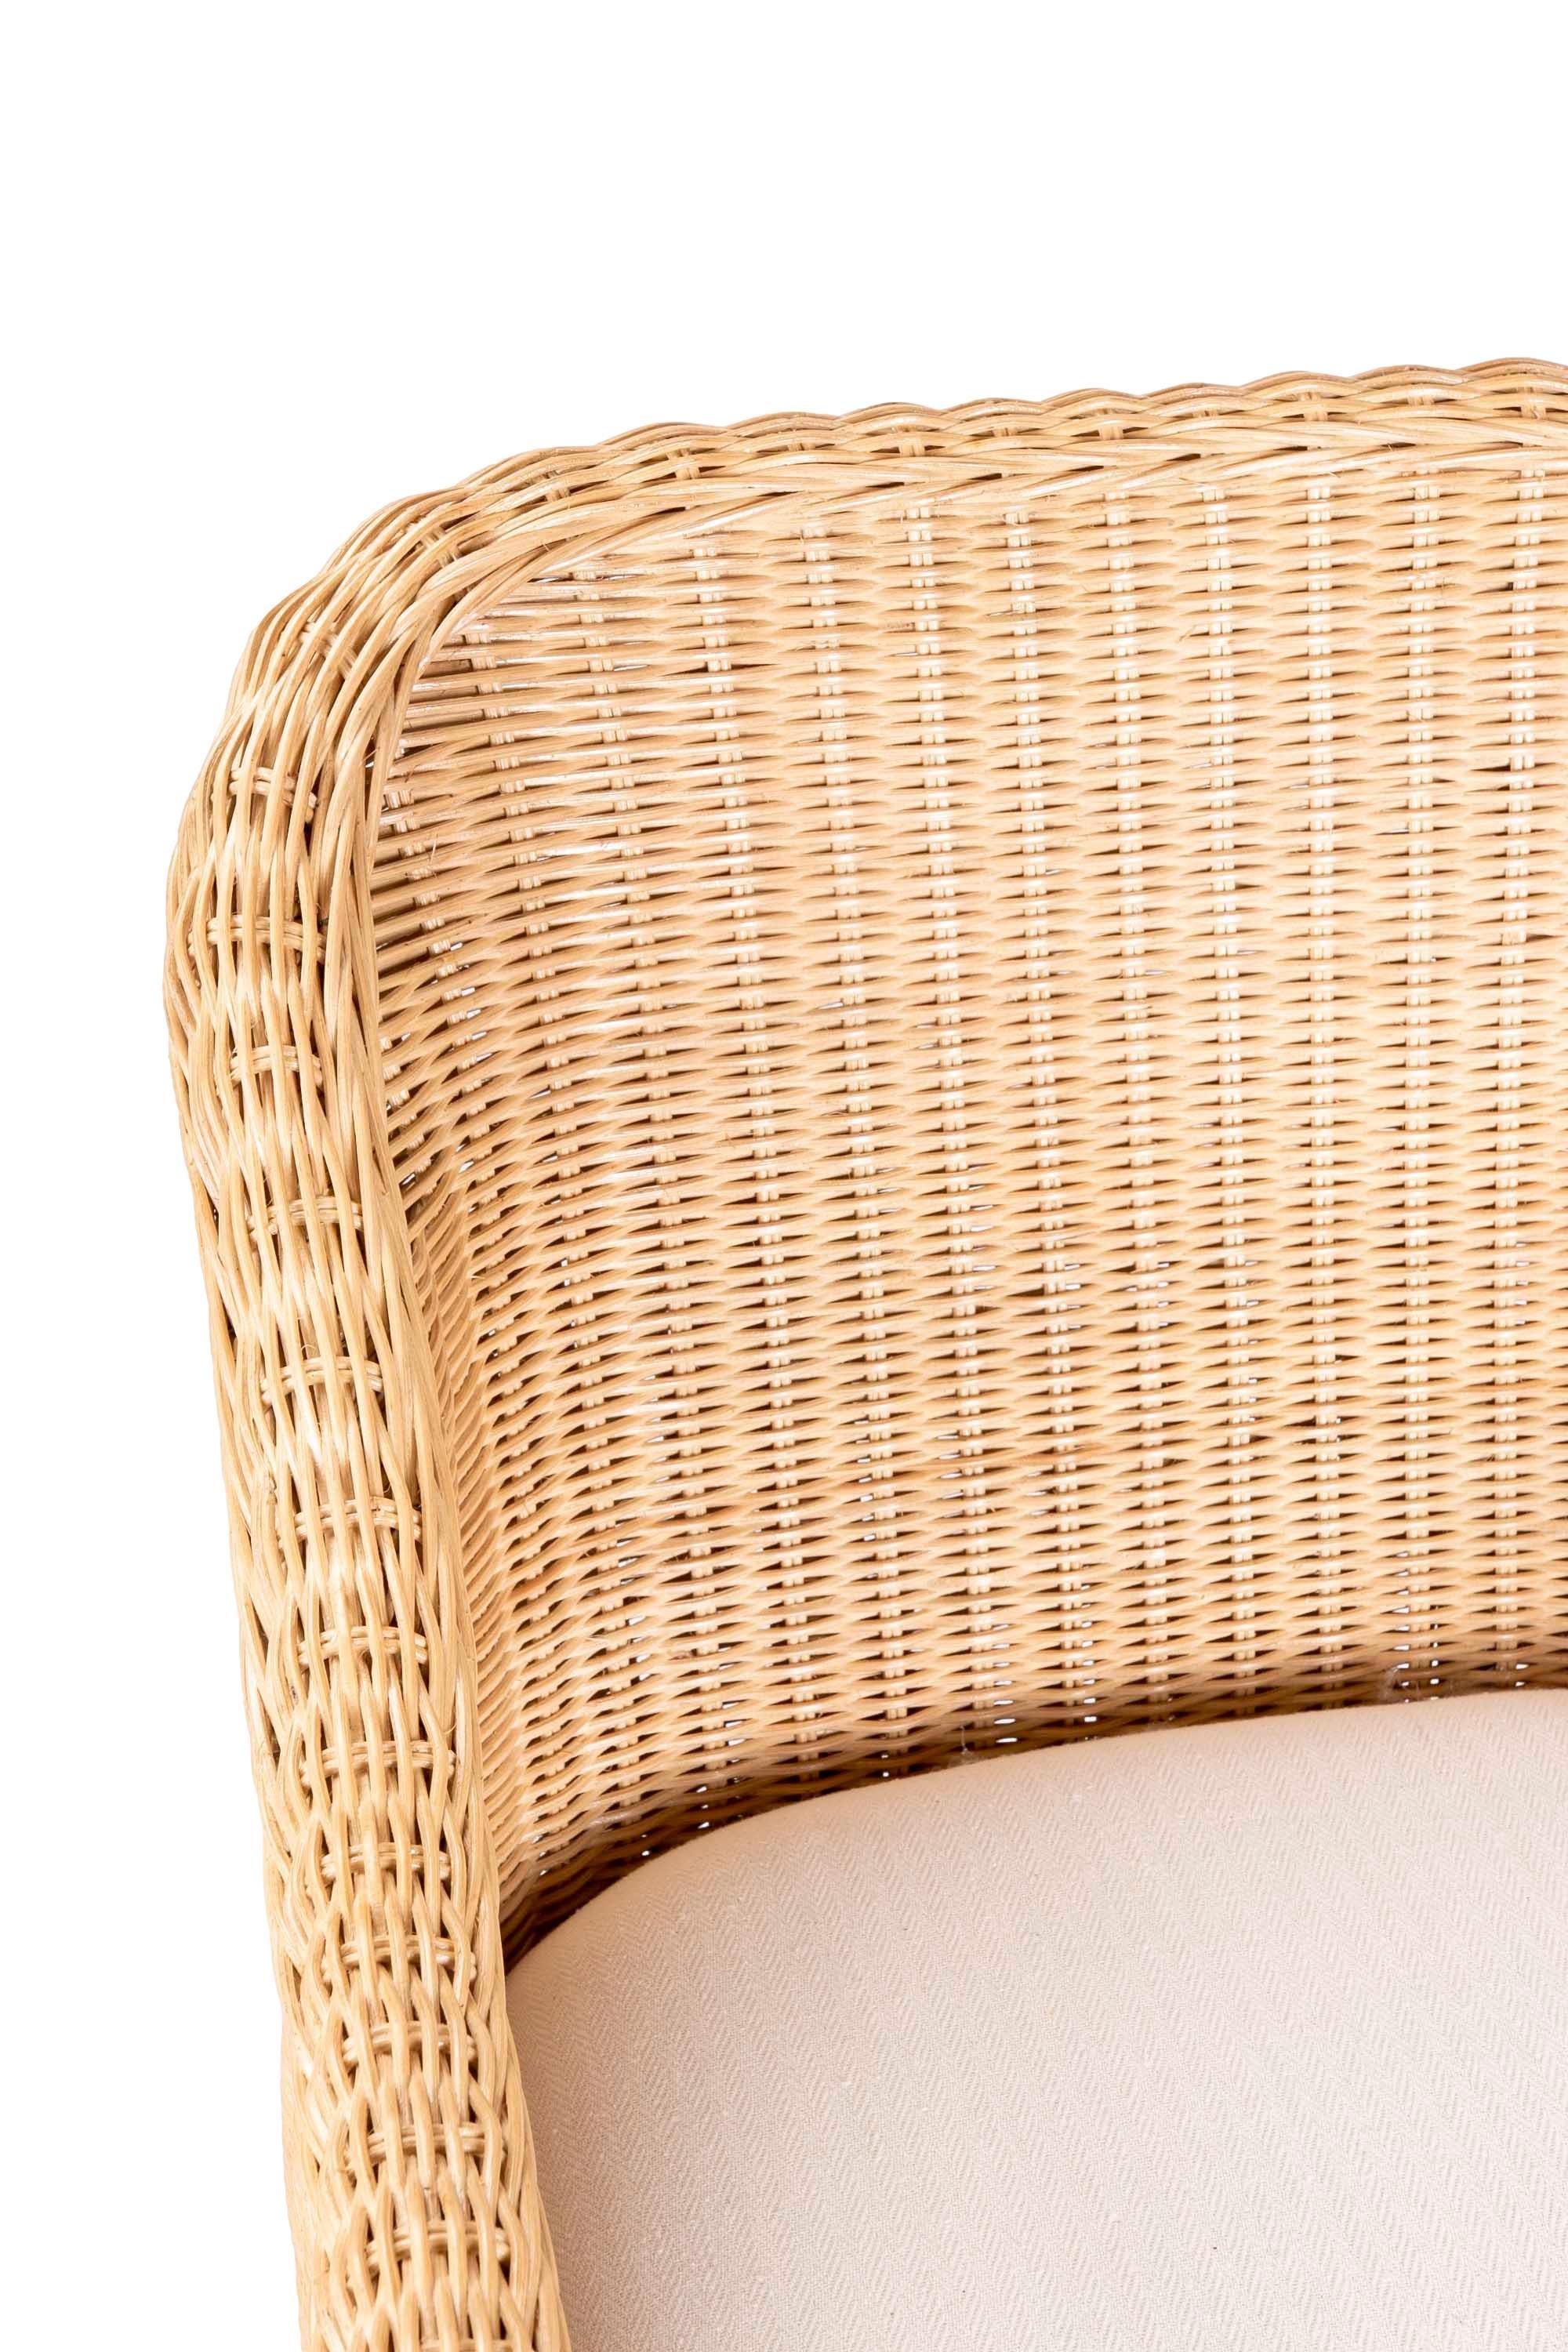 Upholstered Rattan and Wicker Bar stool with Sideways Movement 7